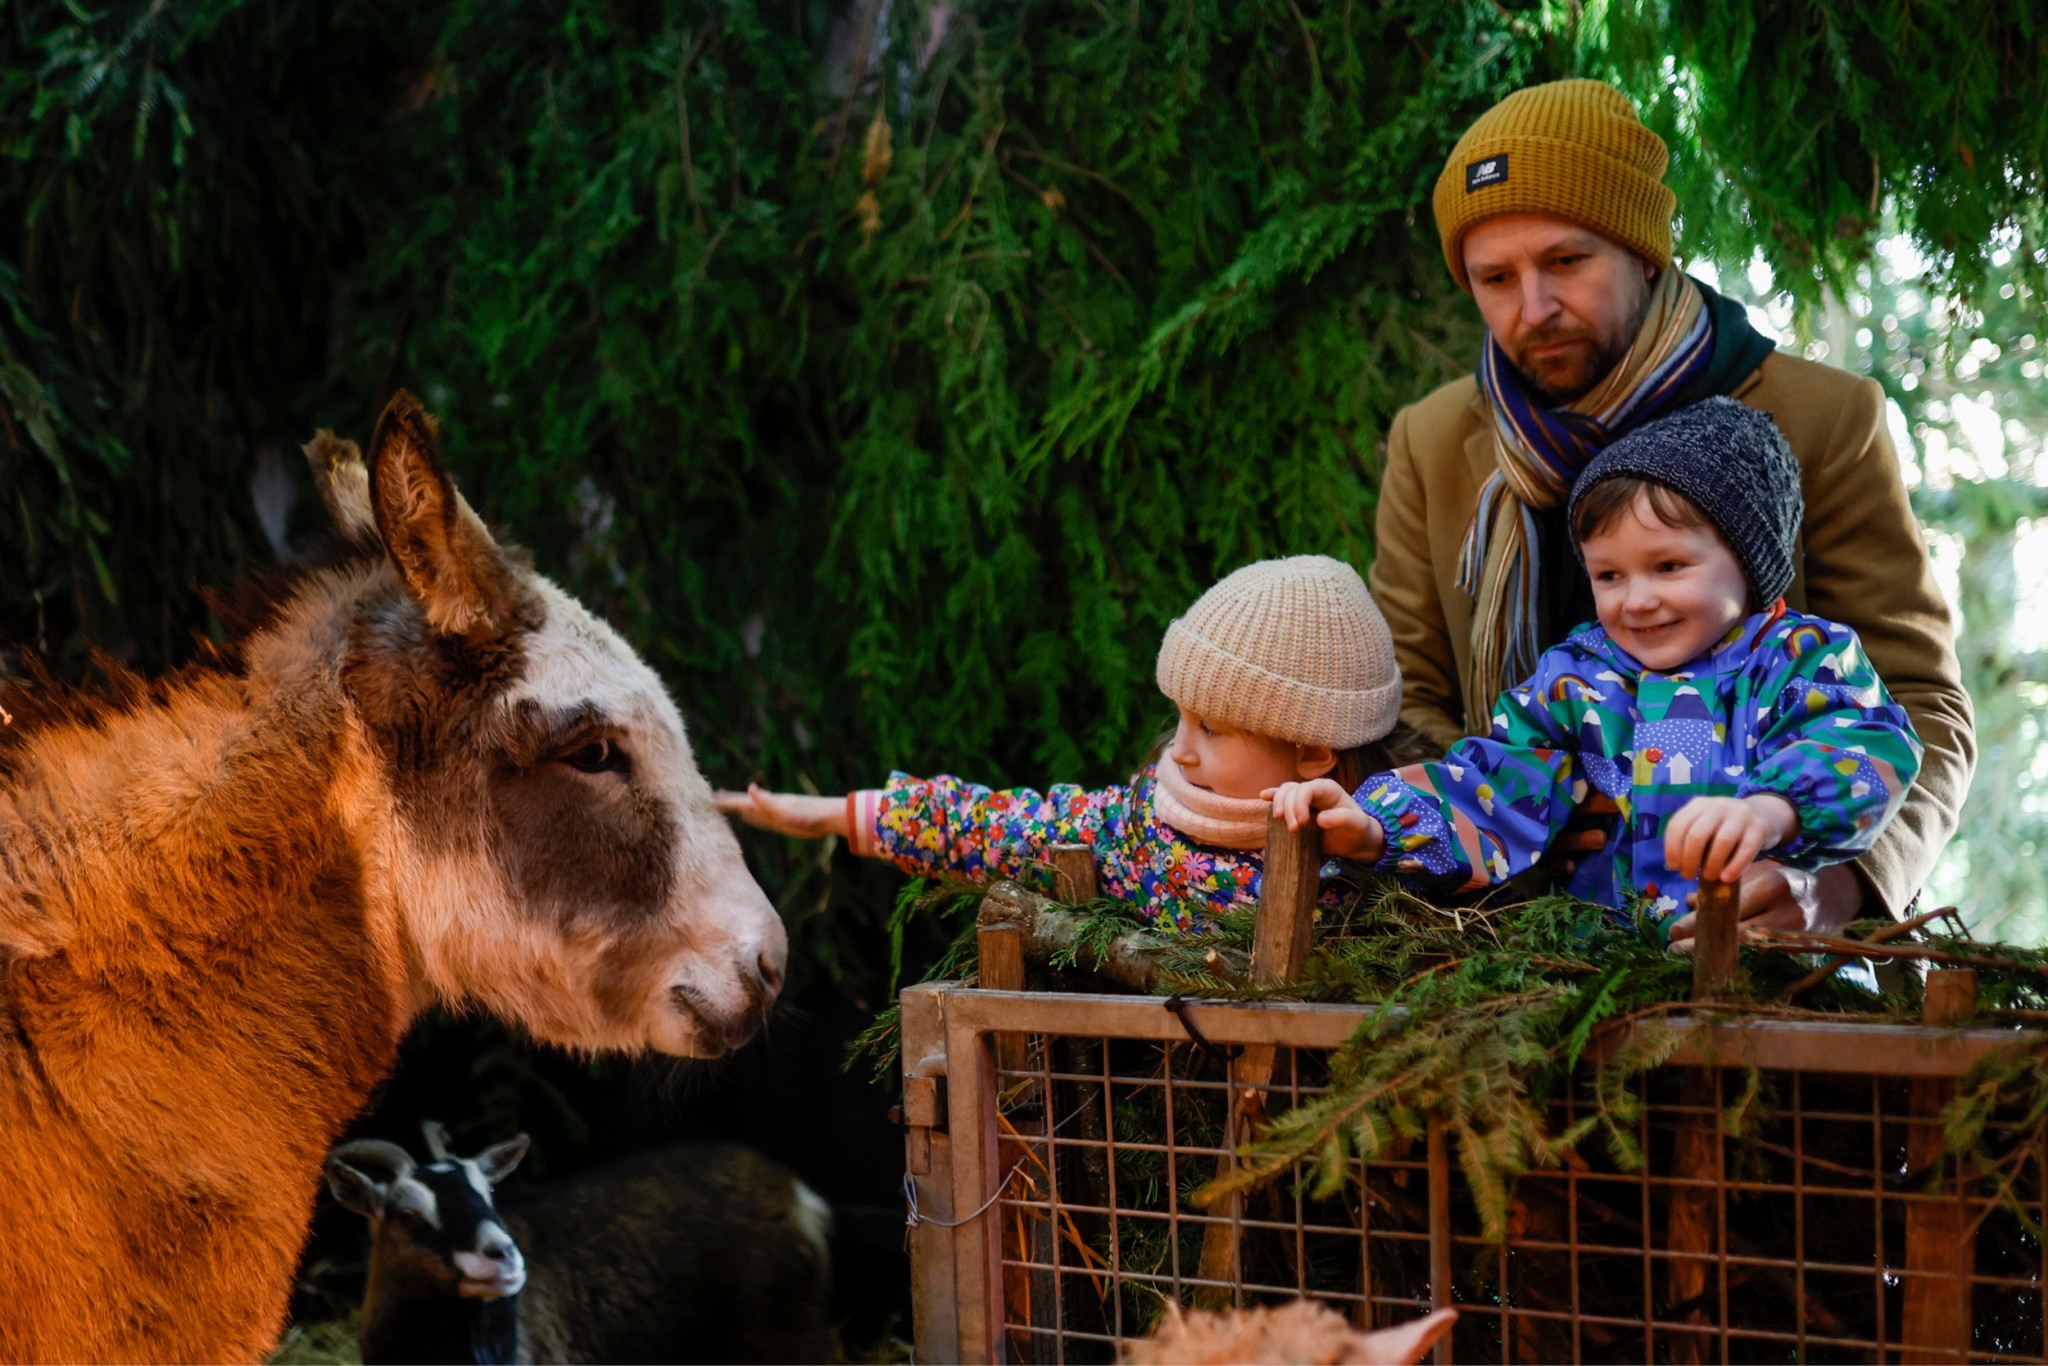 Live Nativity at Tannaghmore